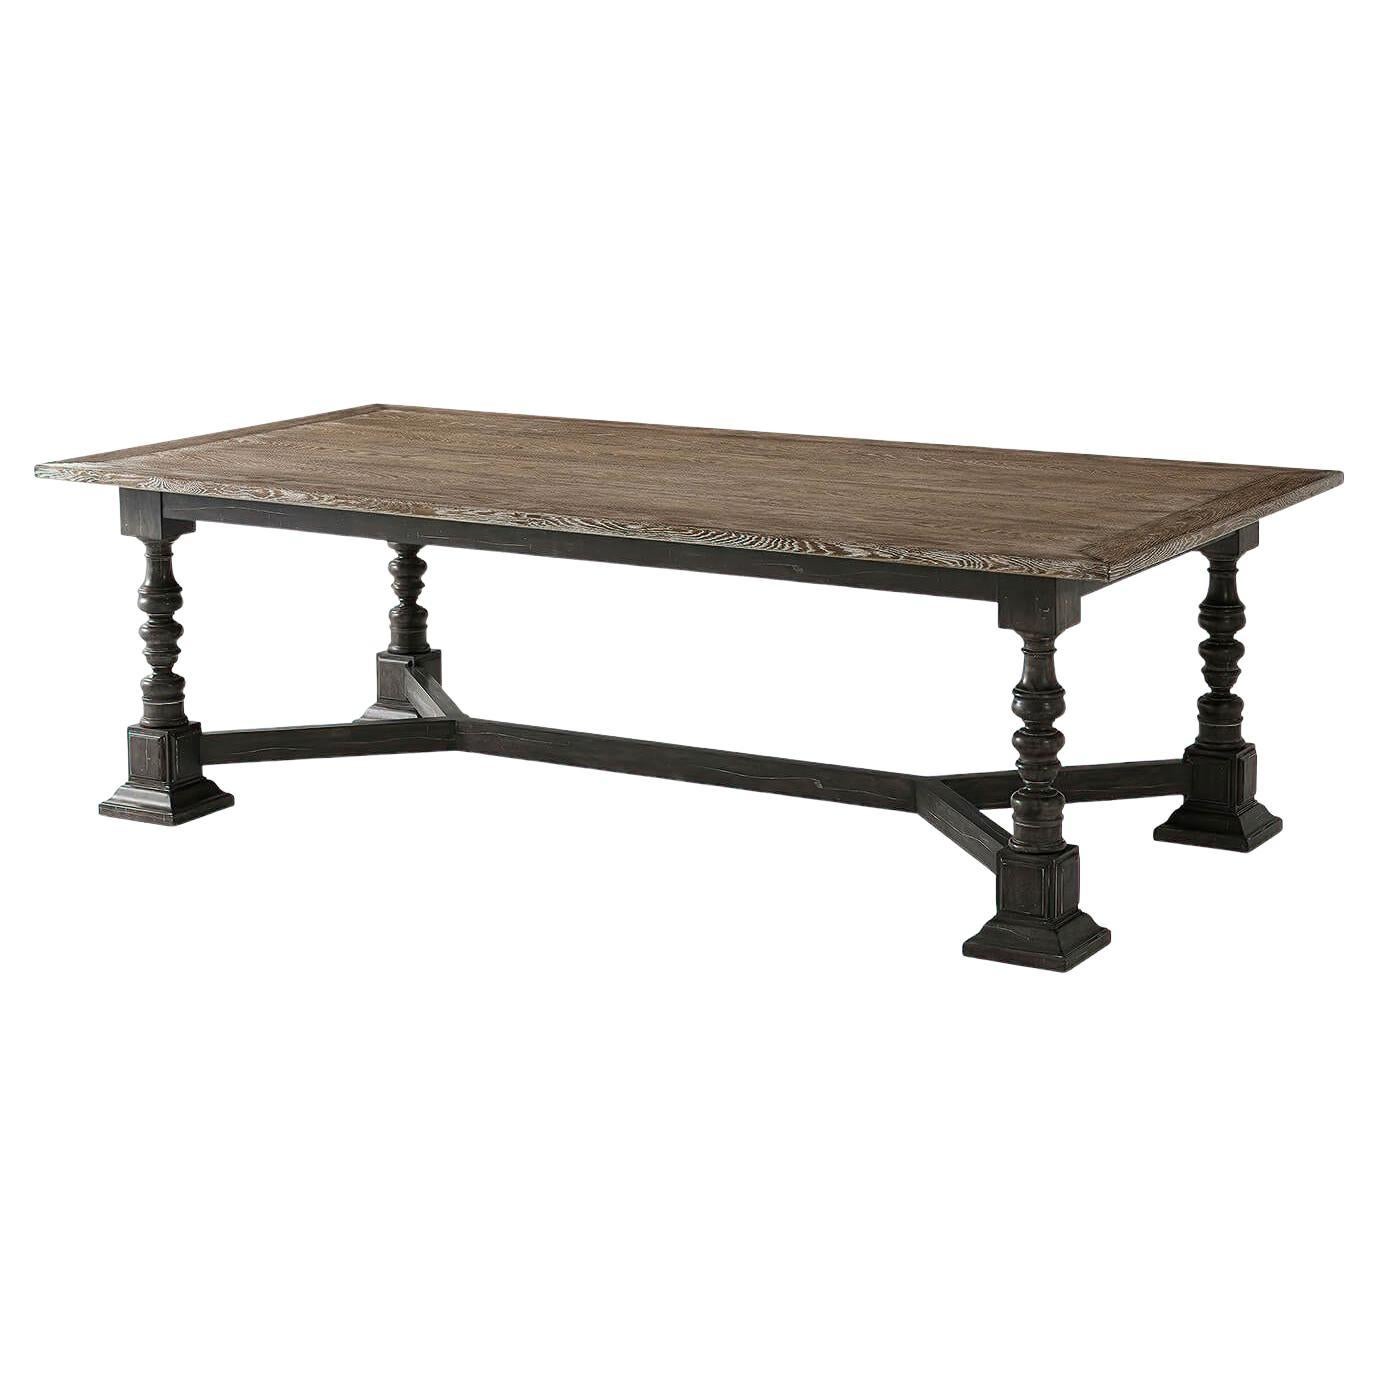 Provincial Rectangular Dining Table For Sale